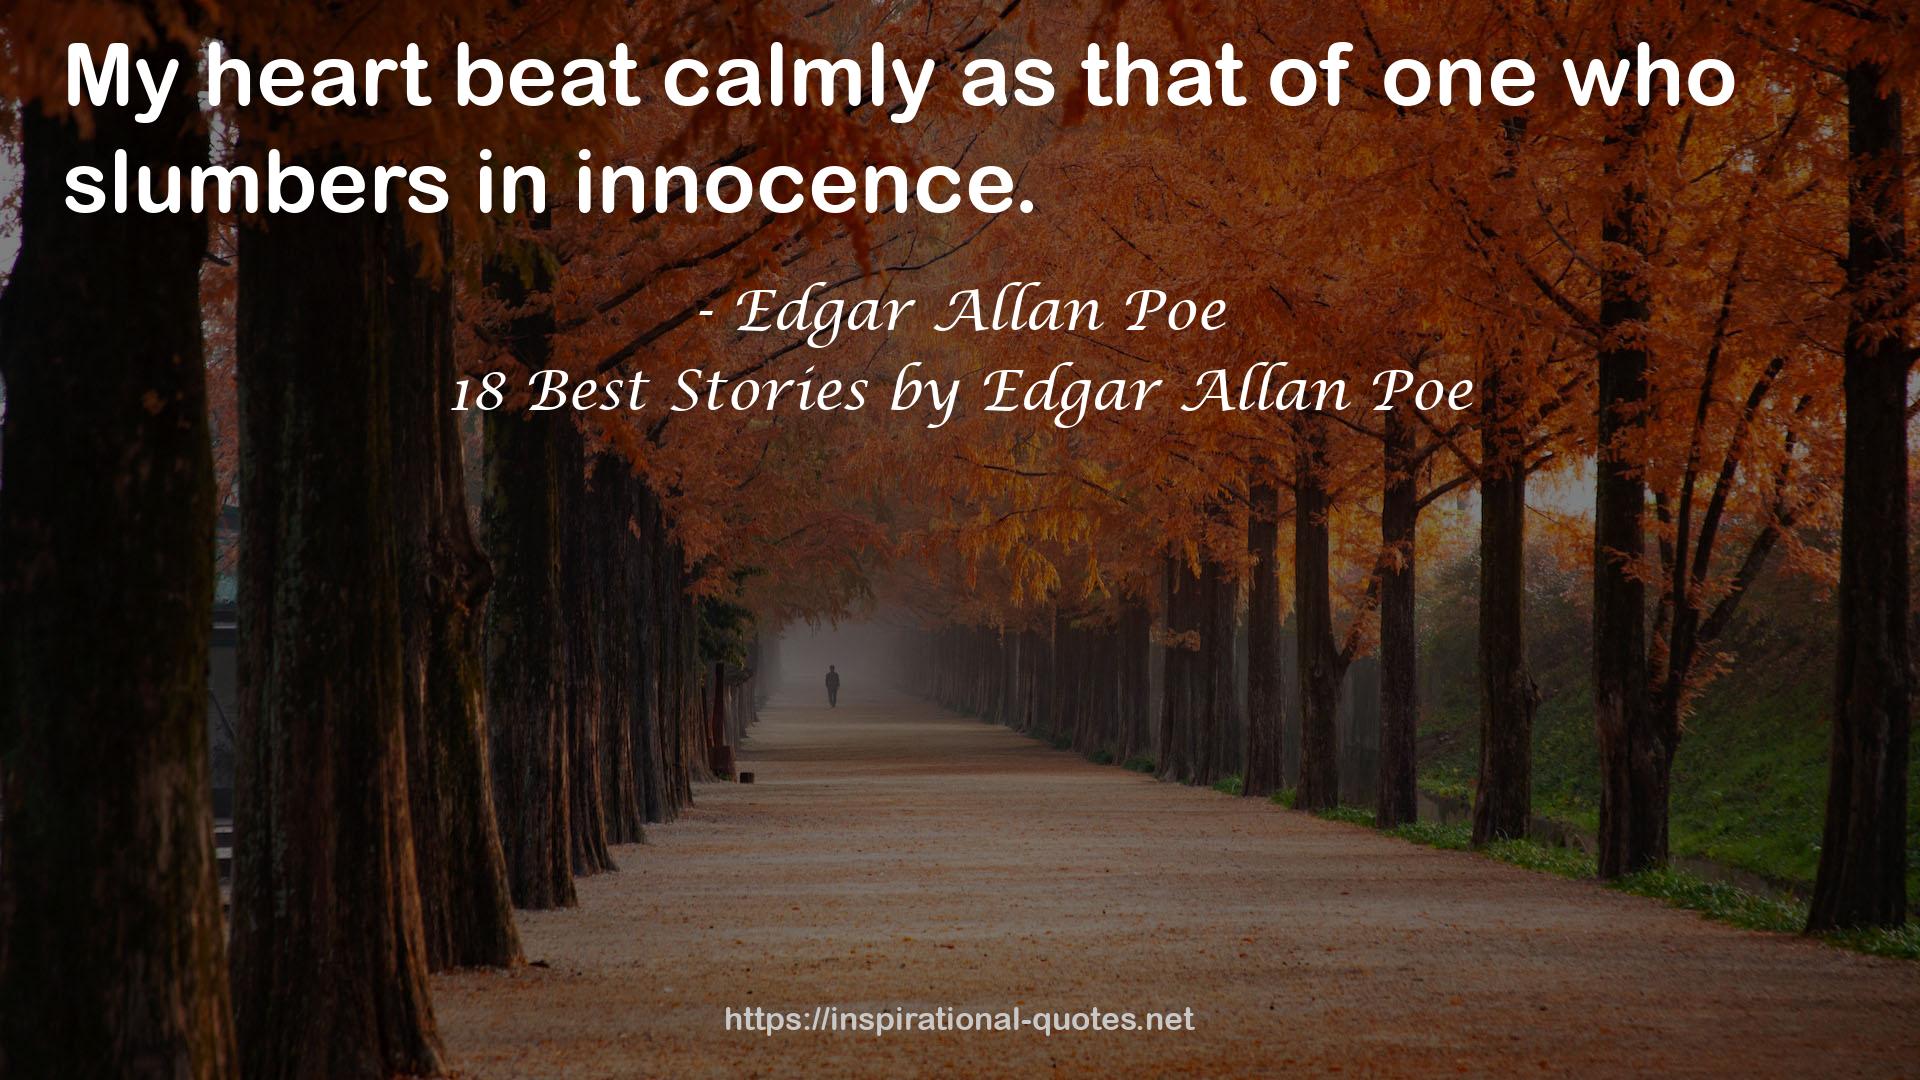 18 Best Stories by Edgar Allan Poe QUOTES